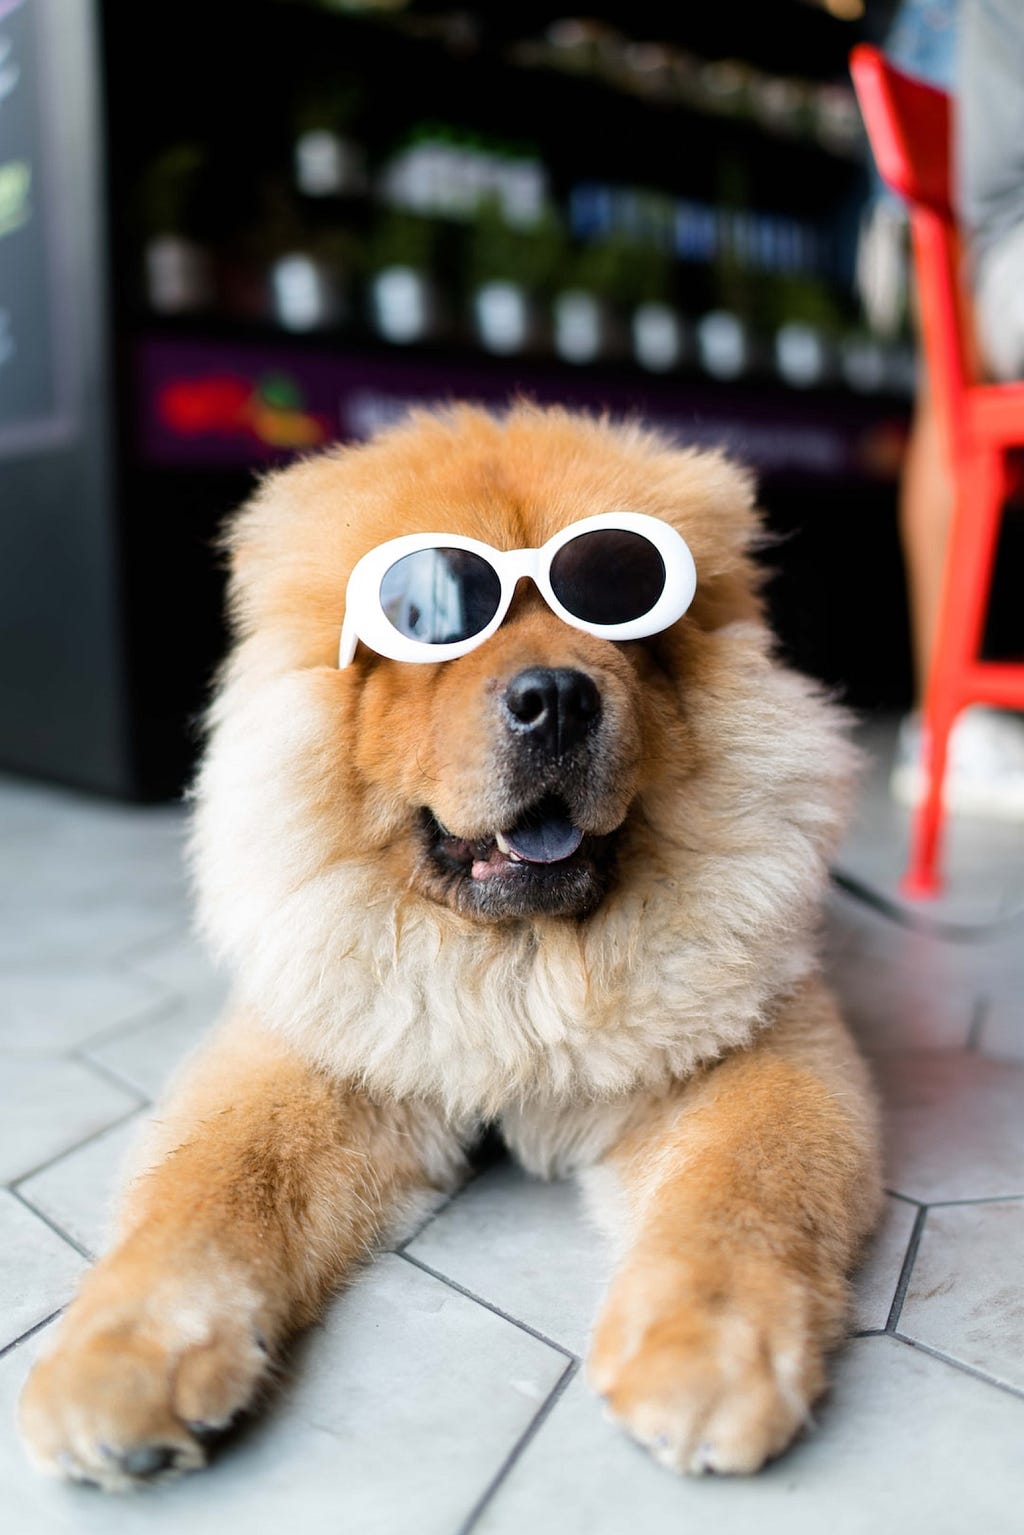 A fluffy orange dog wears some cool looking sunglasses.